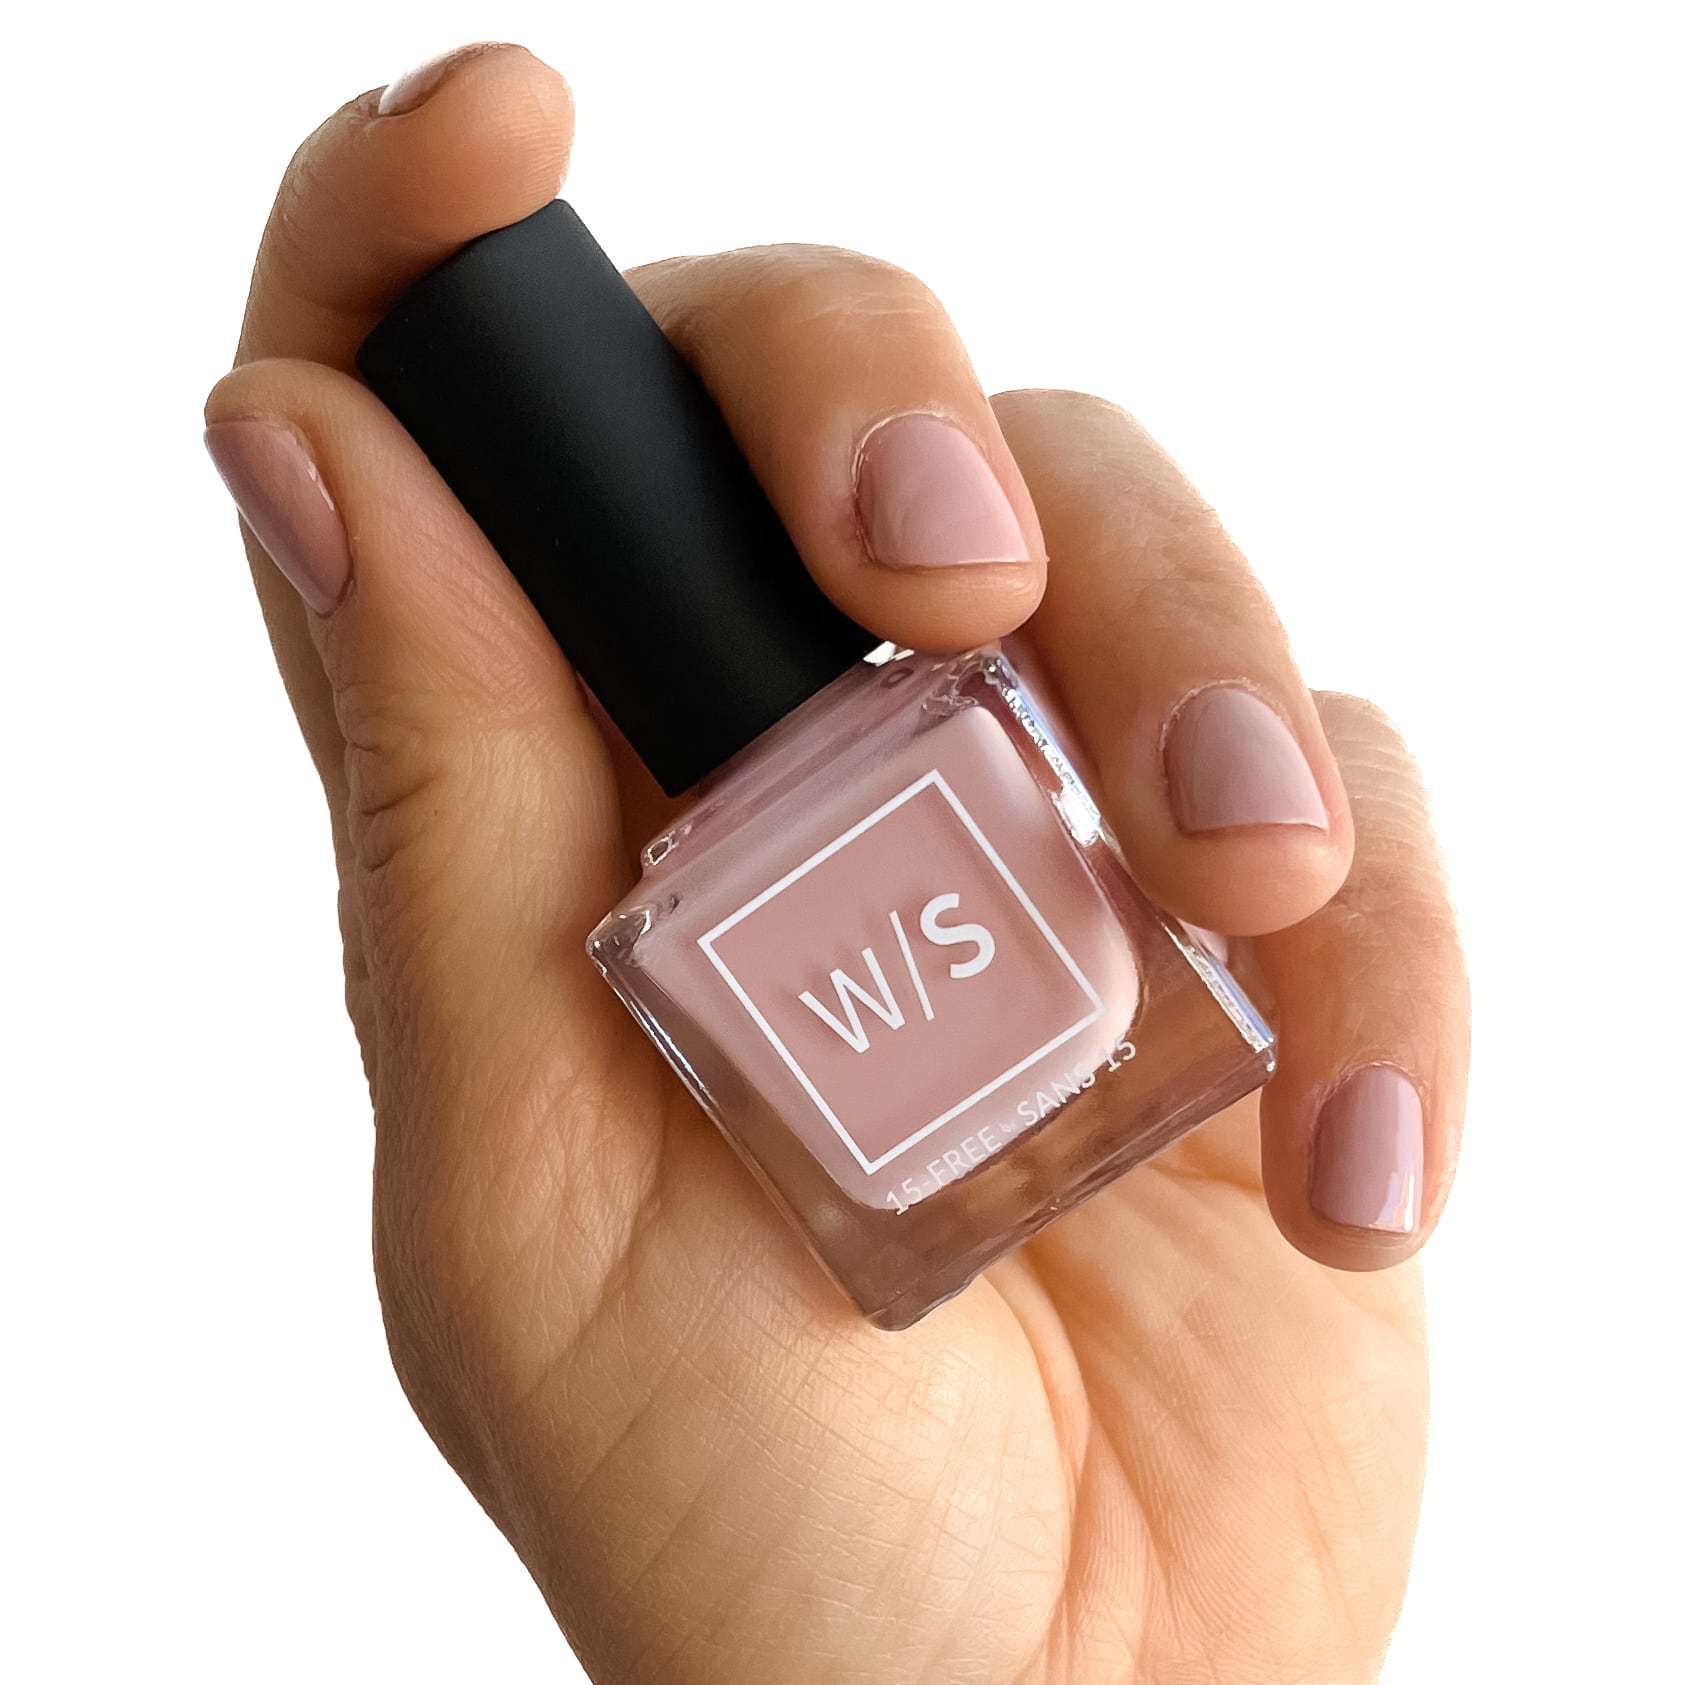 15-Free Nail Polish-Nails-withSimplicity-On Pointe-withSimplicity